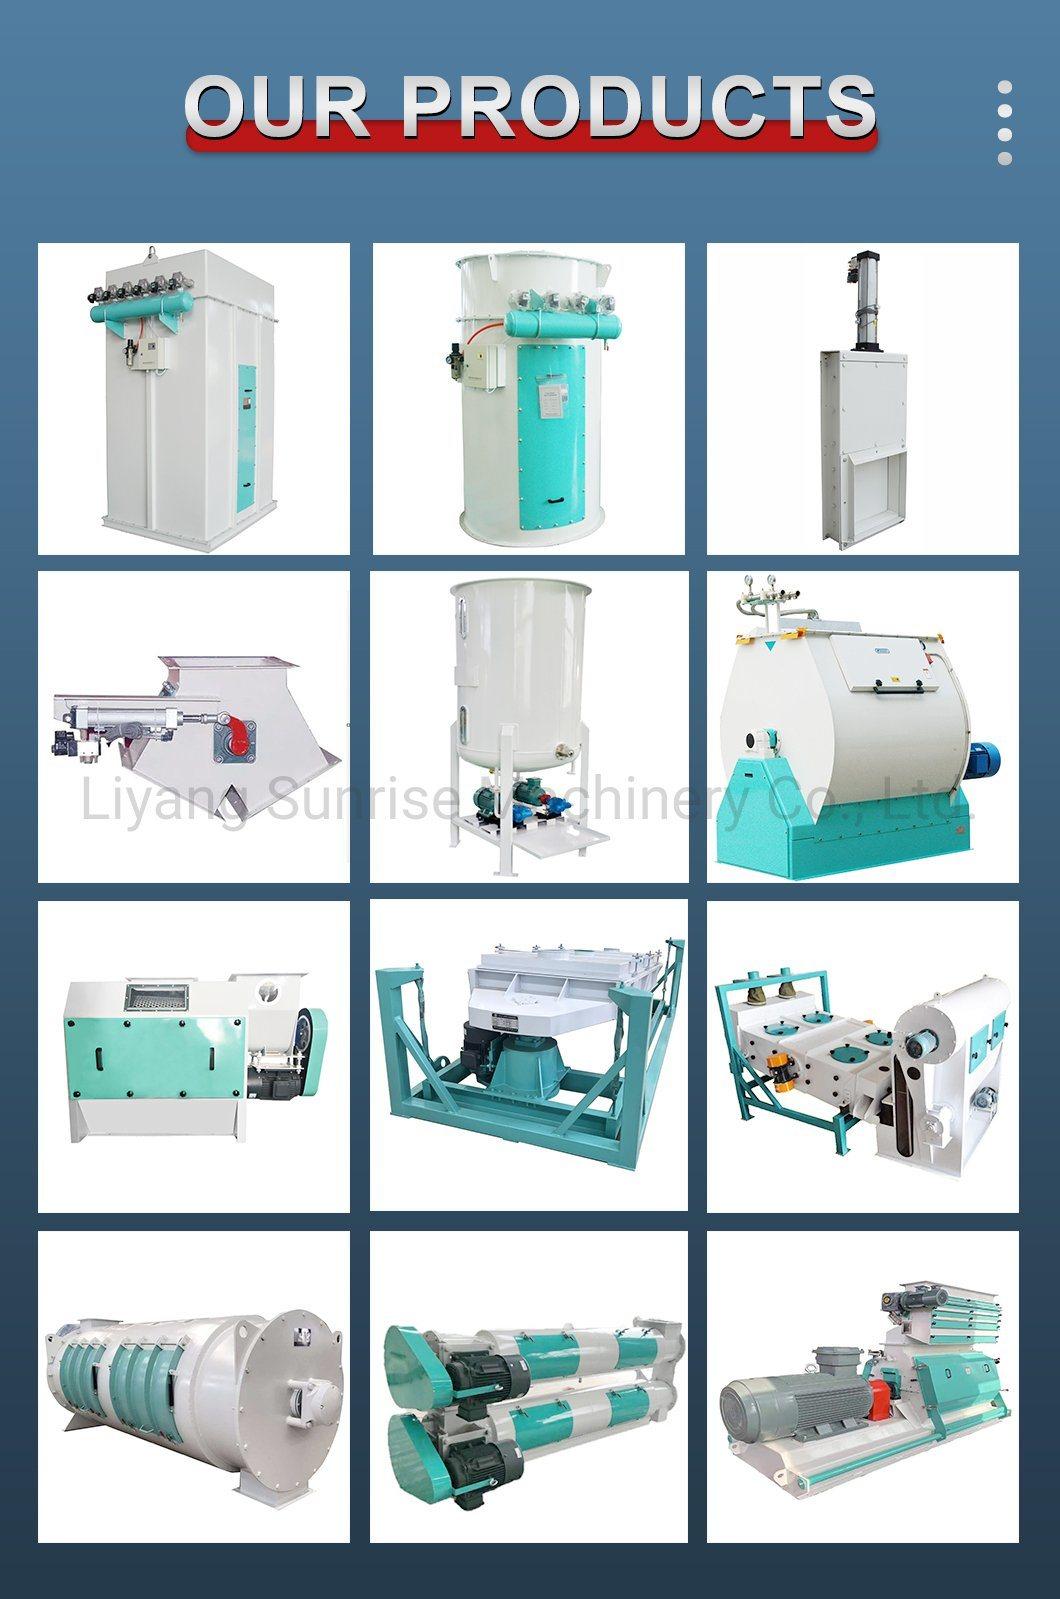 High Quality Doubel-Shaft Paddle Mixer for Sale